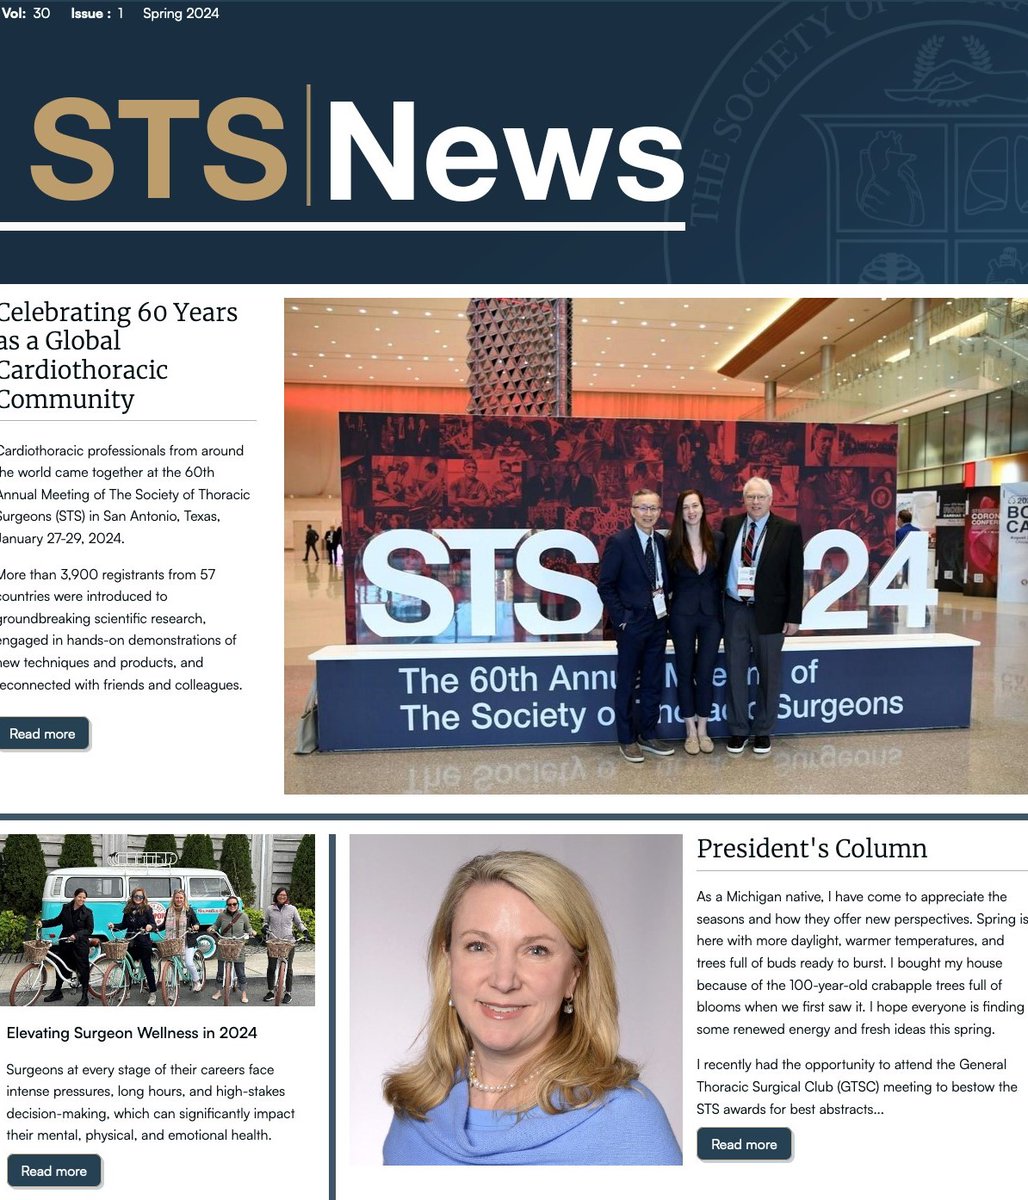 Everybody’s reading the newest issue of STS News, our members-only quarterly magazine. Find the latest news and stories advancing the CT surgery field and Society. See why surgeons from across the country become life-long STS members. #CTSurgery bit.ly/44lQInN